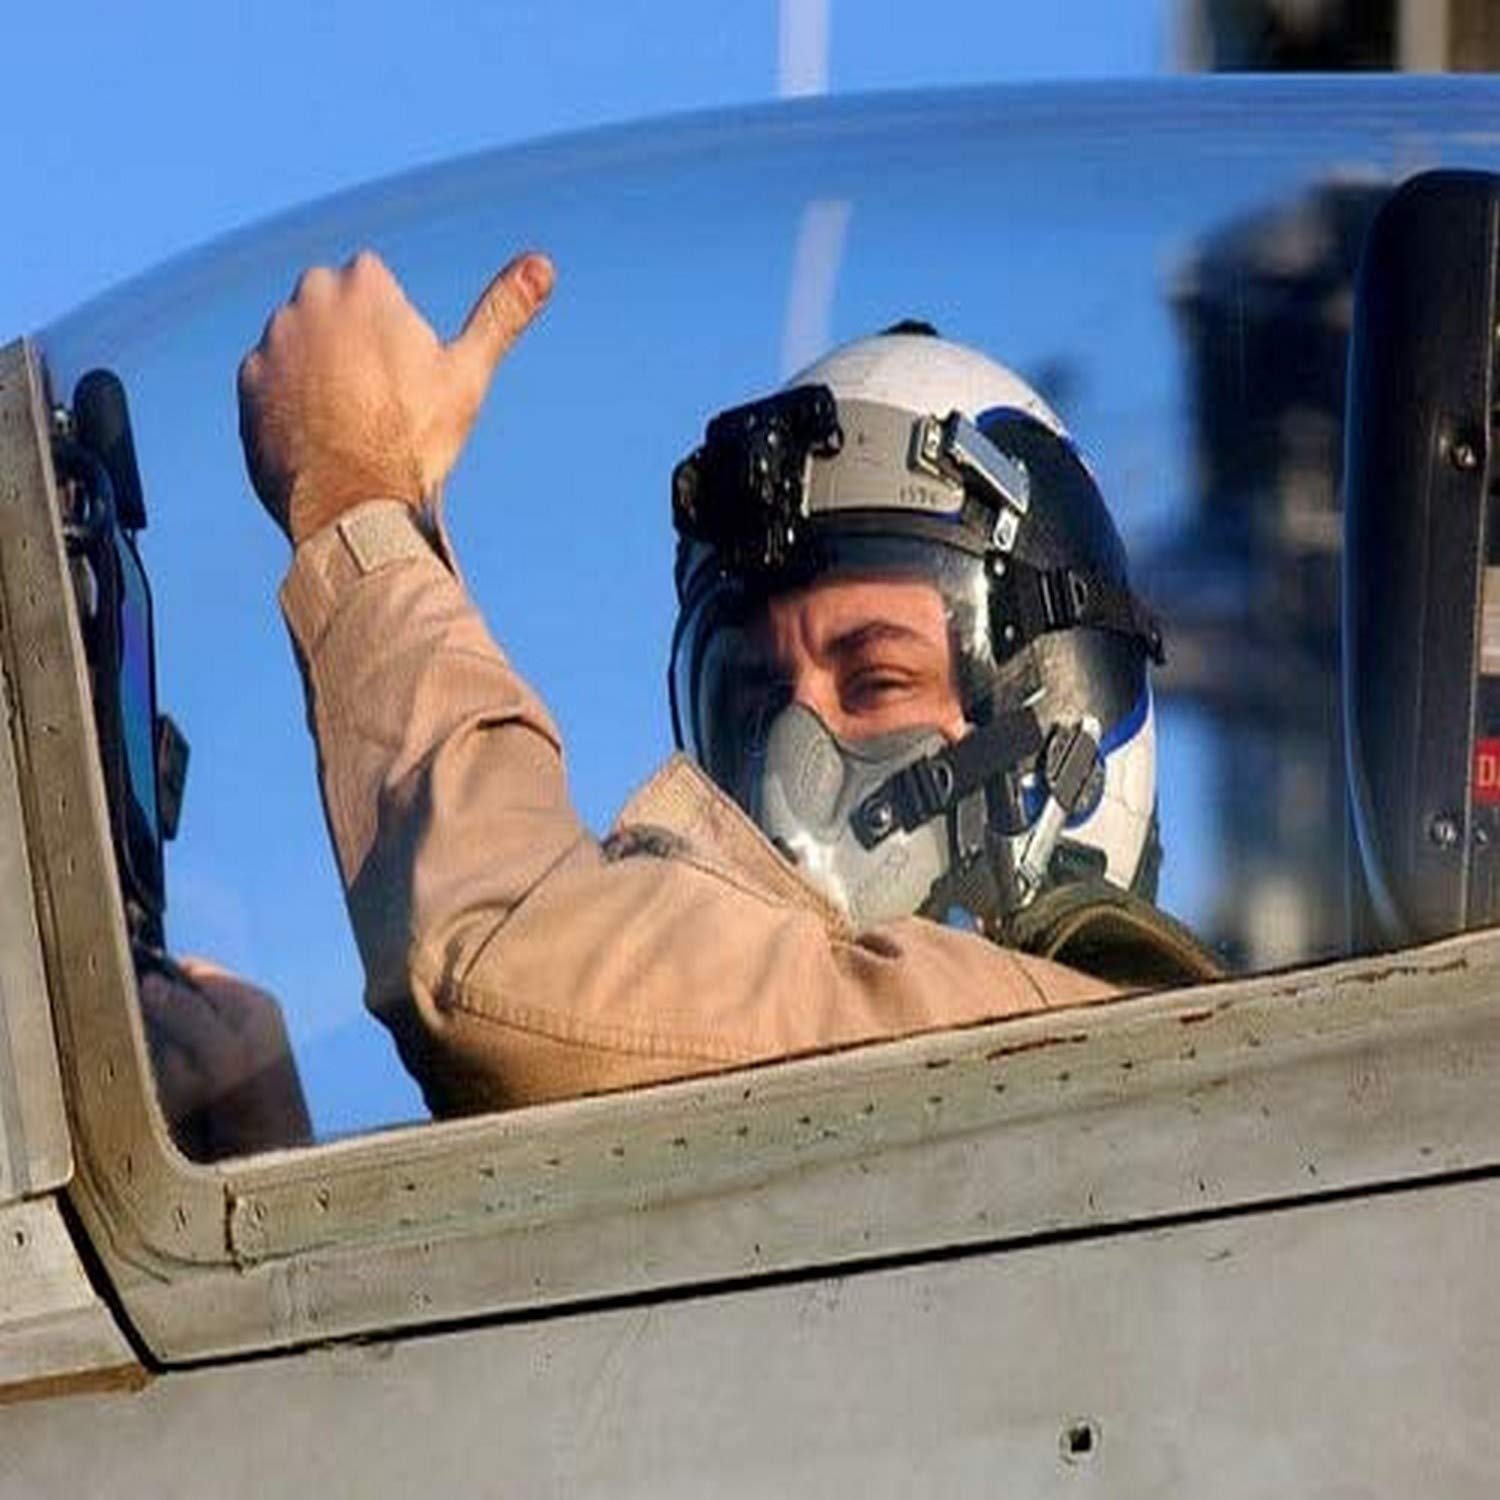 Pilot giving a thumbs up